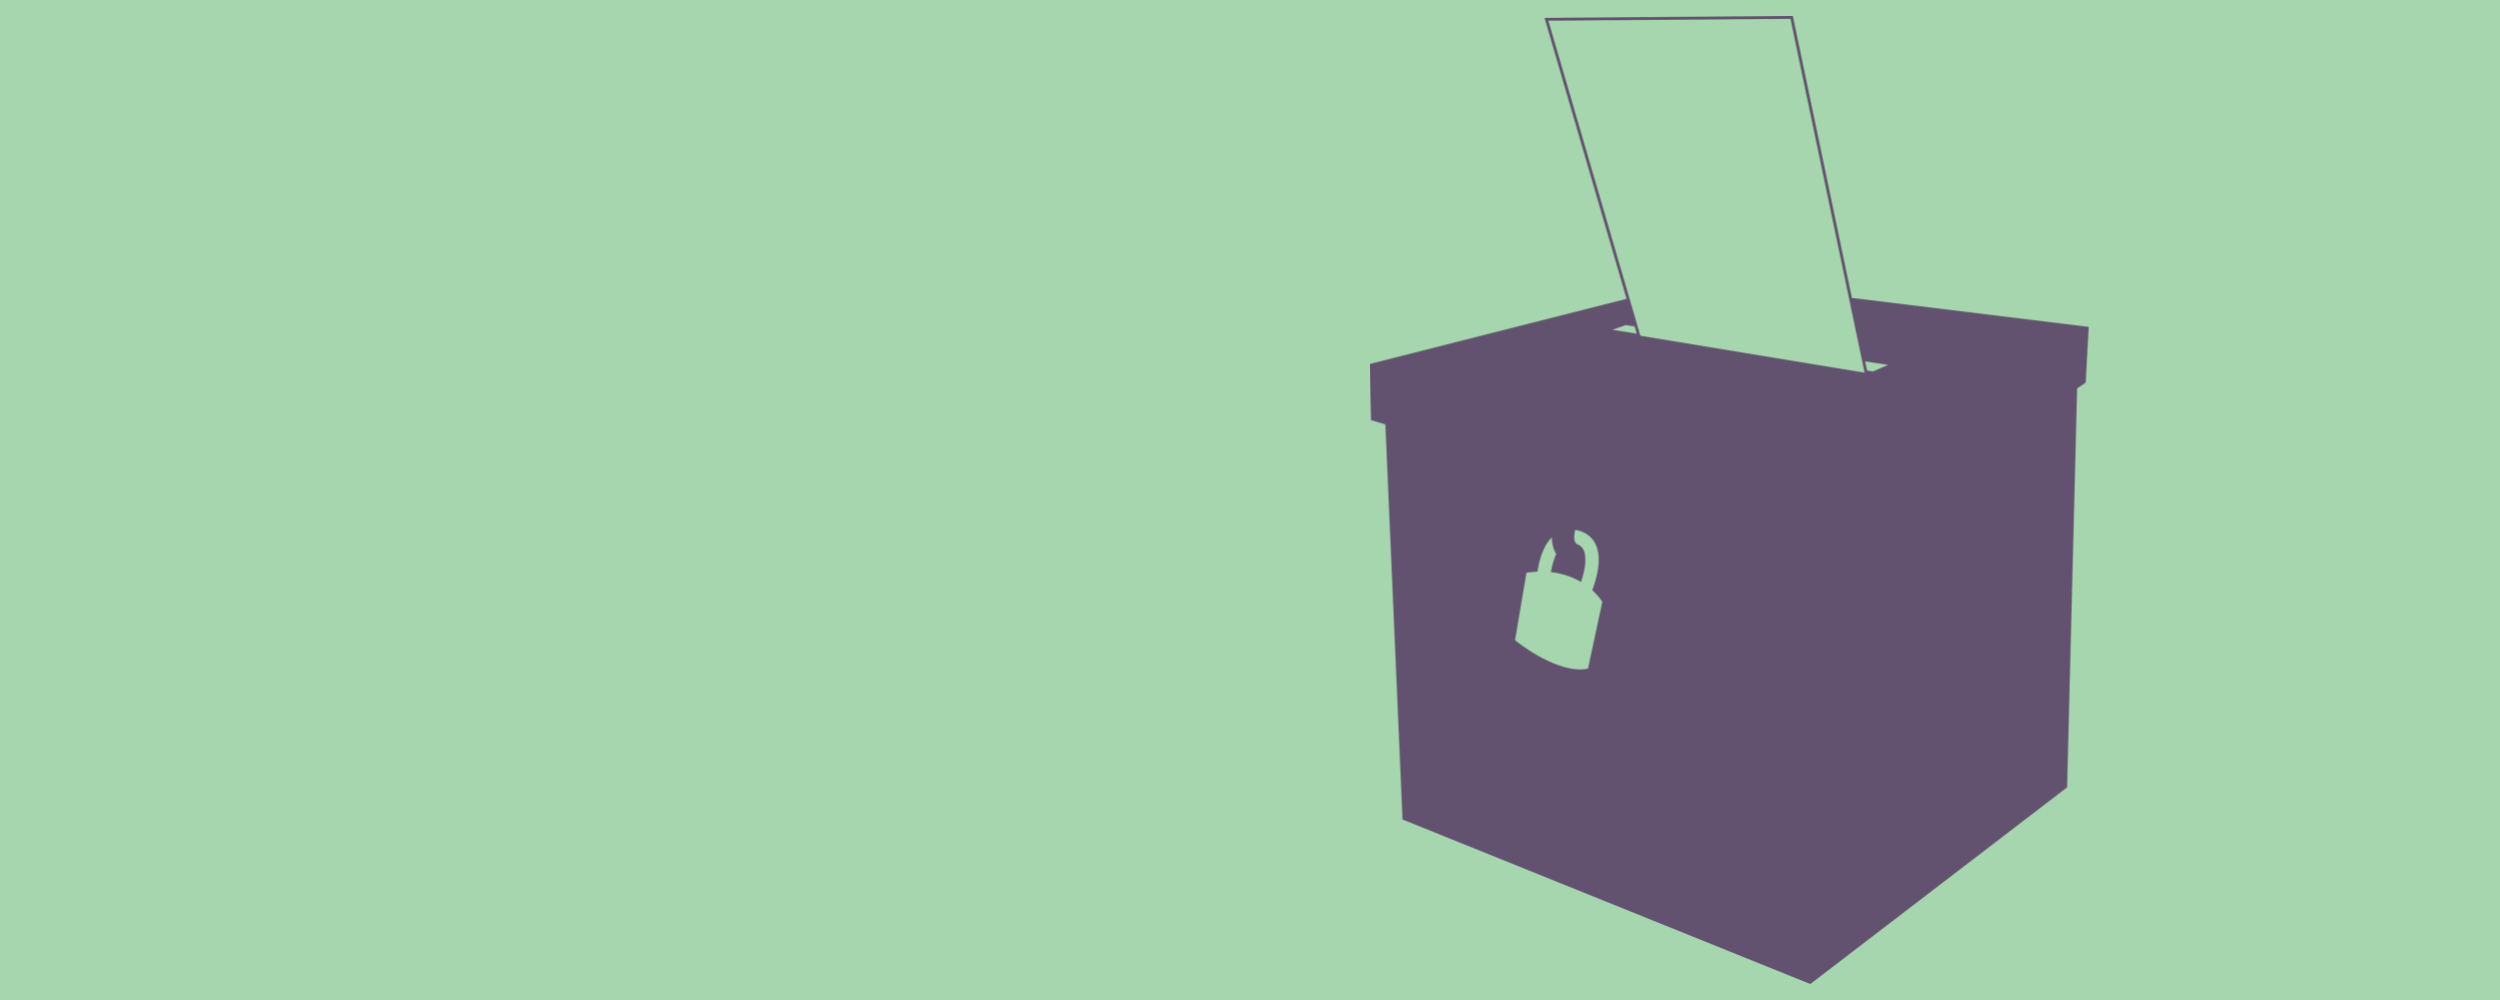 image of ballot box used in elections